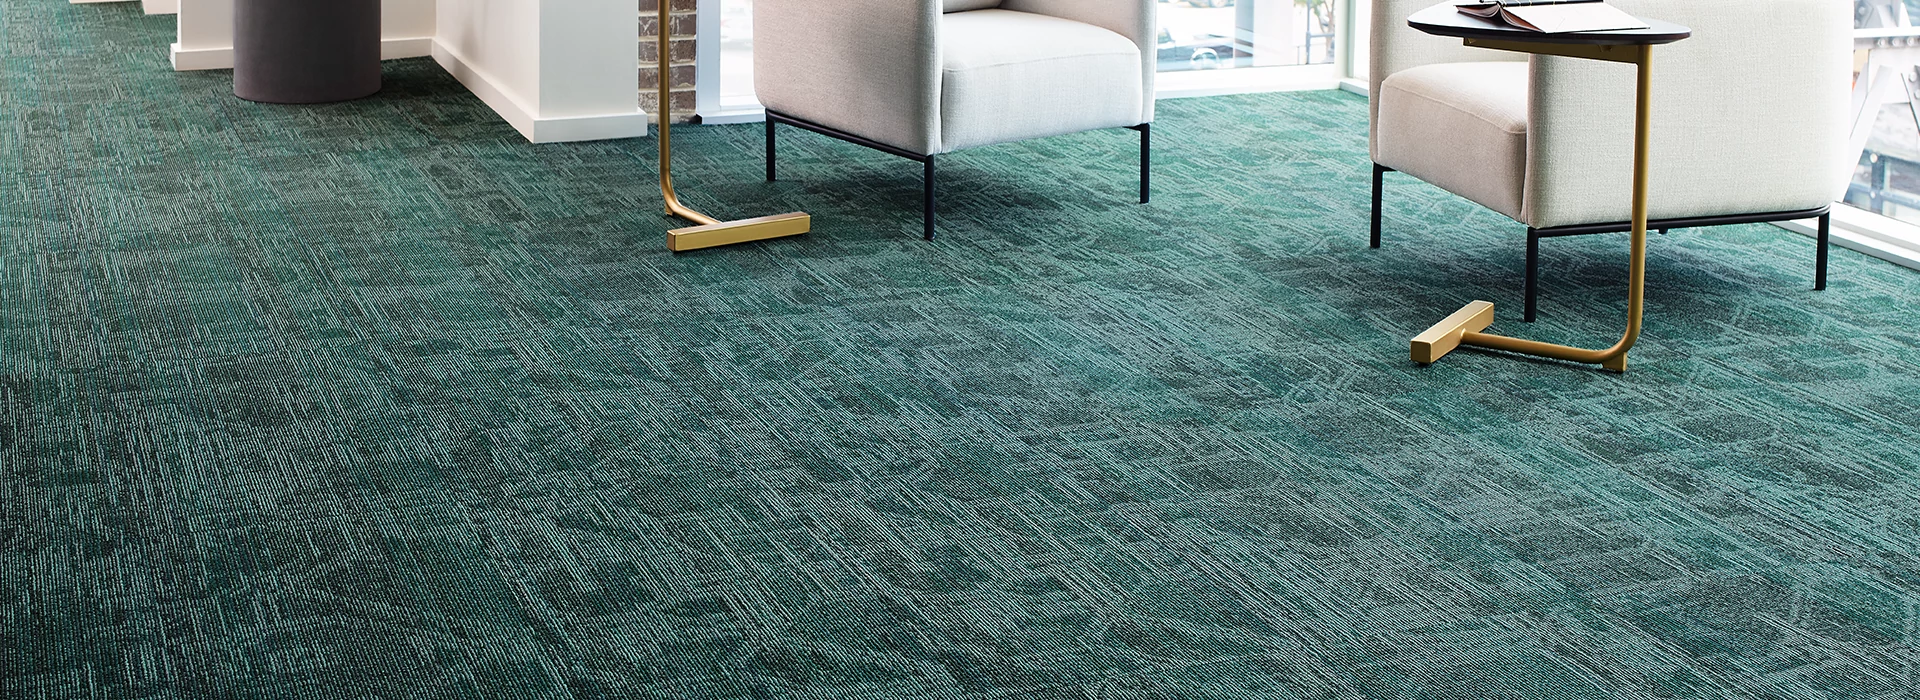 Emerald textured carpet in an upscale office